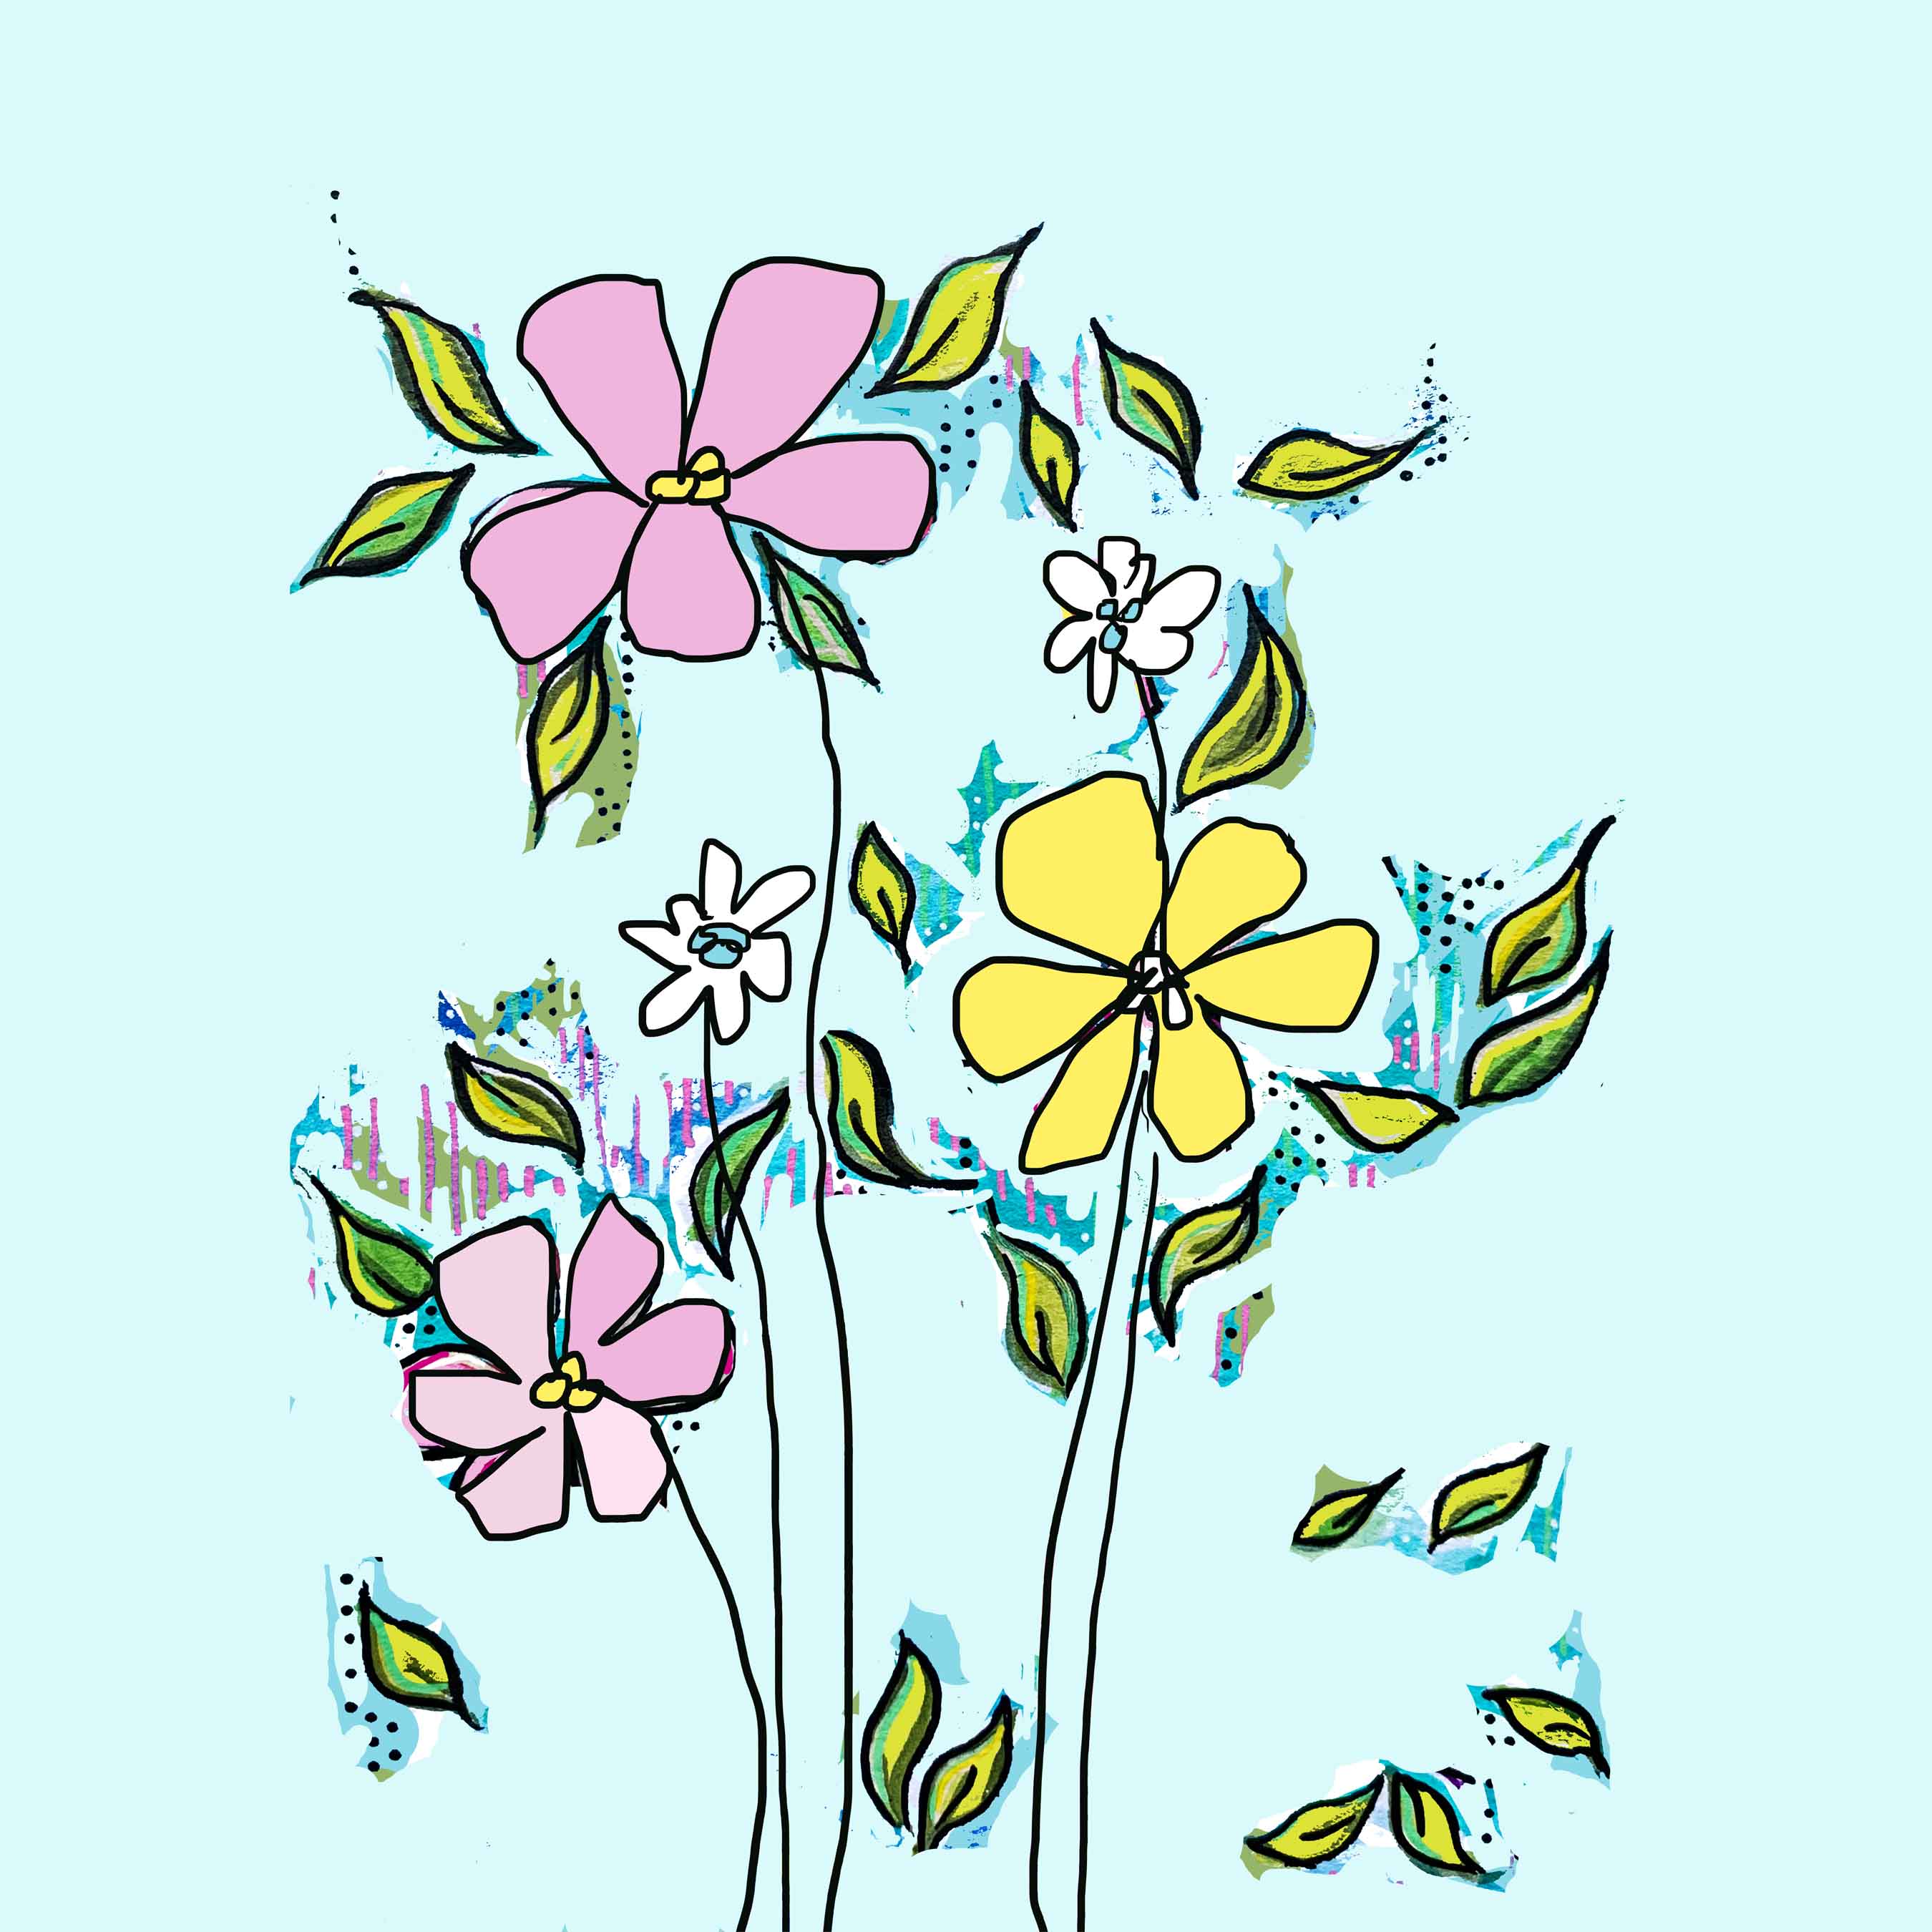 art every day number 607 five flowers three colours creation illustration drawing